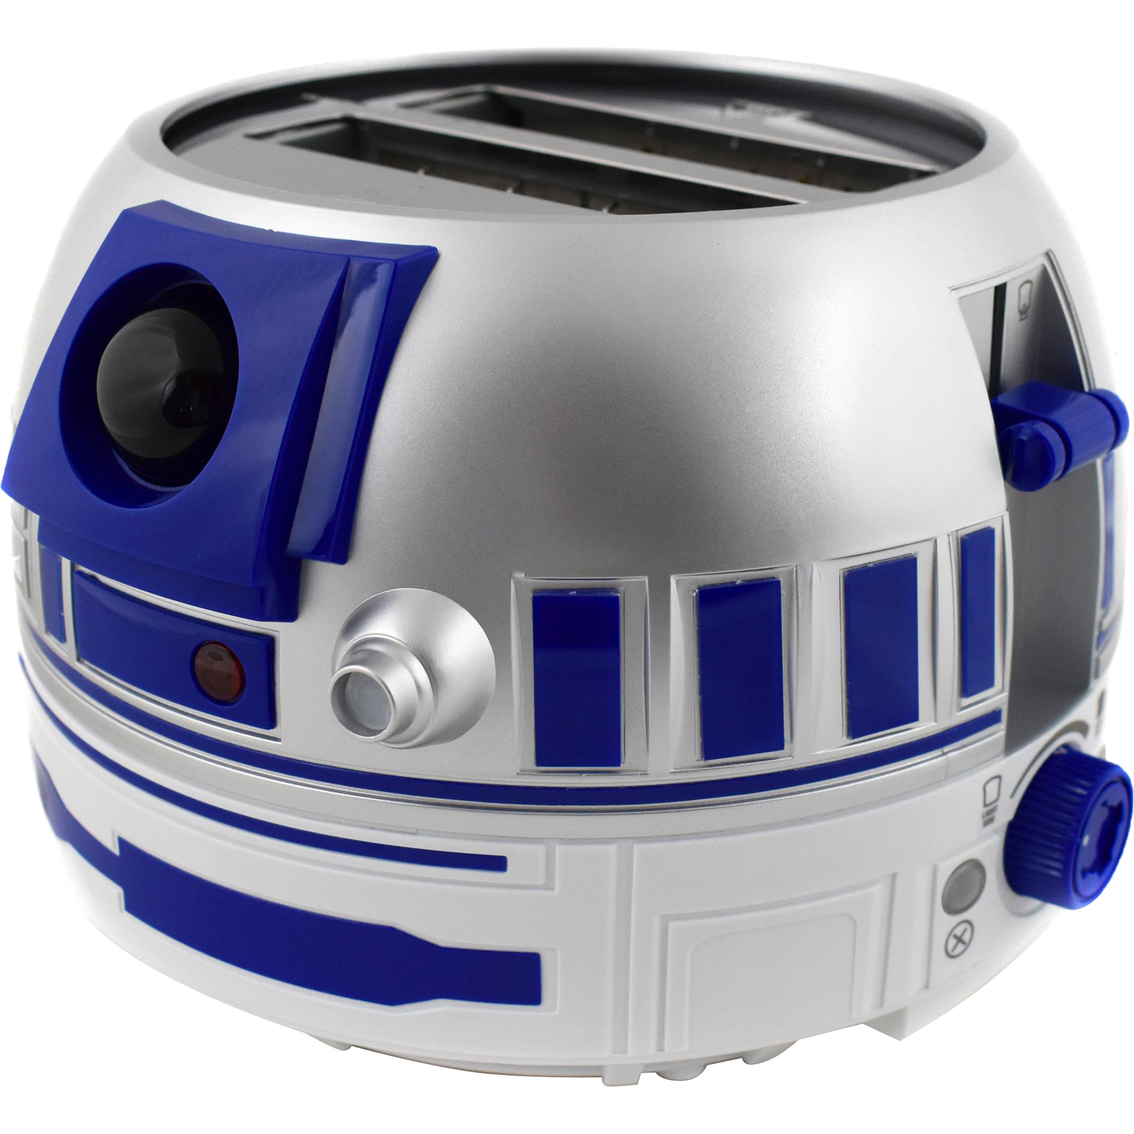 Star Wars R2-D2 Deluxe Toaster - Image 2 of 6